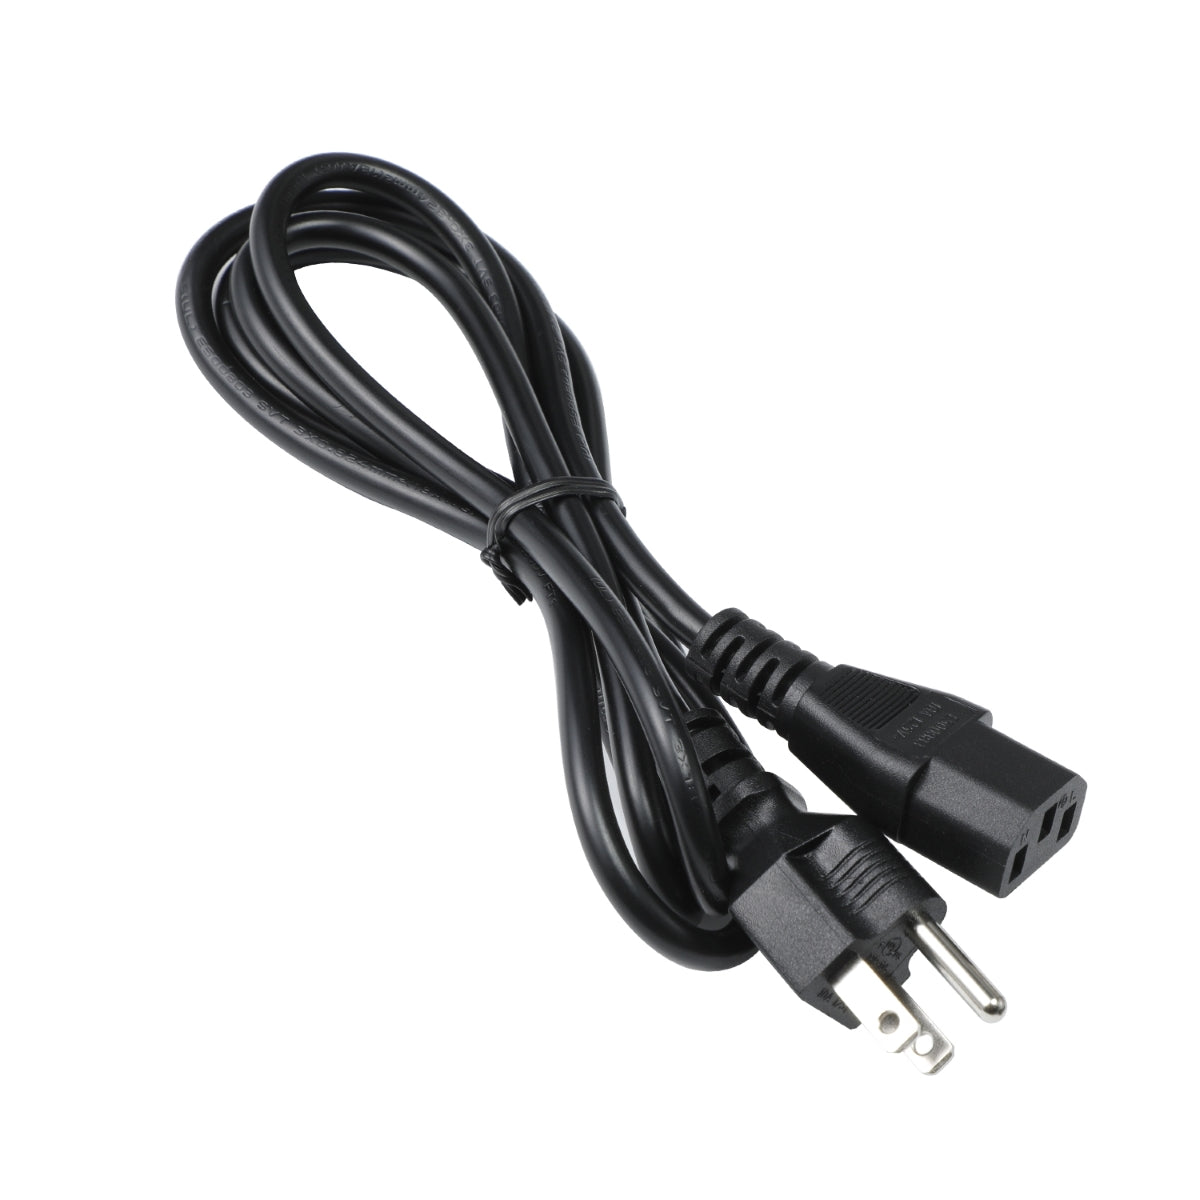 Power Cord for Acer XB273 Pbmiprzx Monitor